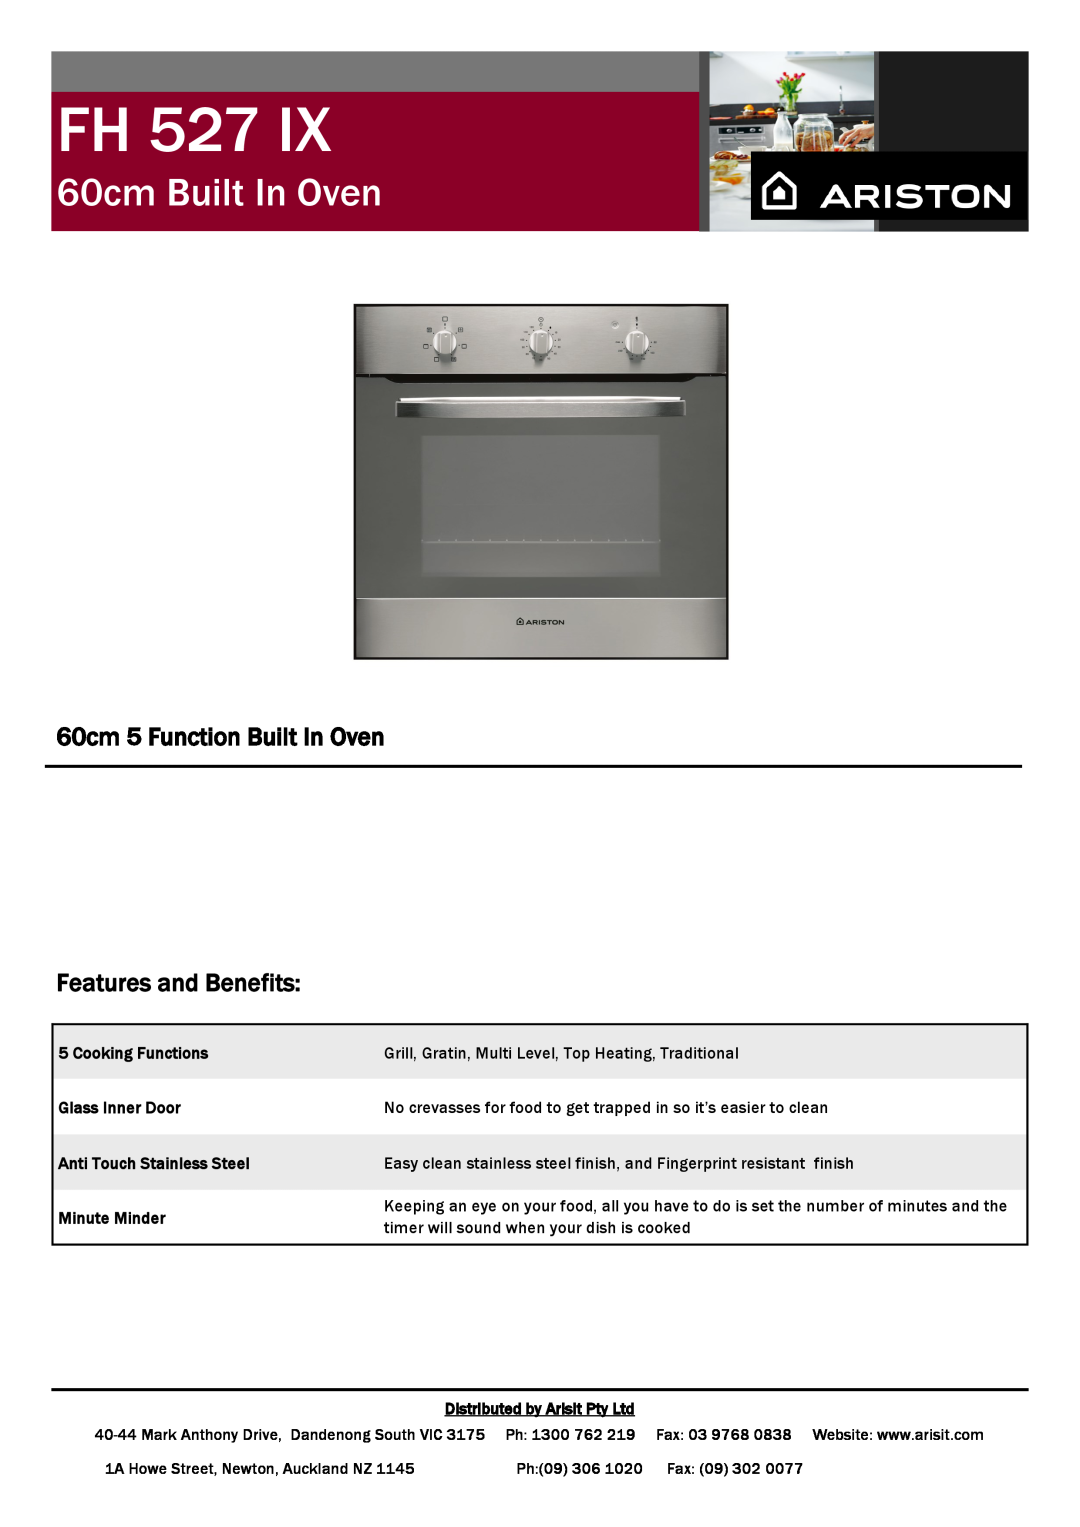 Ariston FH 527 IX manual Fh, 60cm Built In Oven, 60cm 5 Function Built In Oven, Features and Benefits 